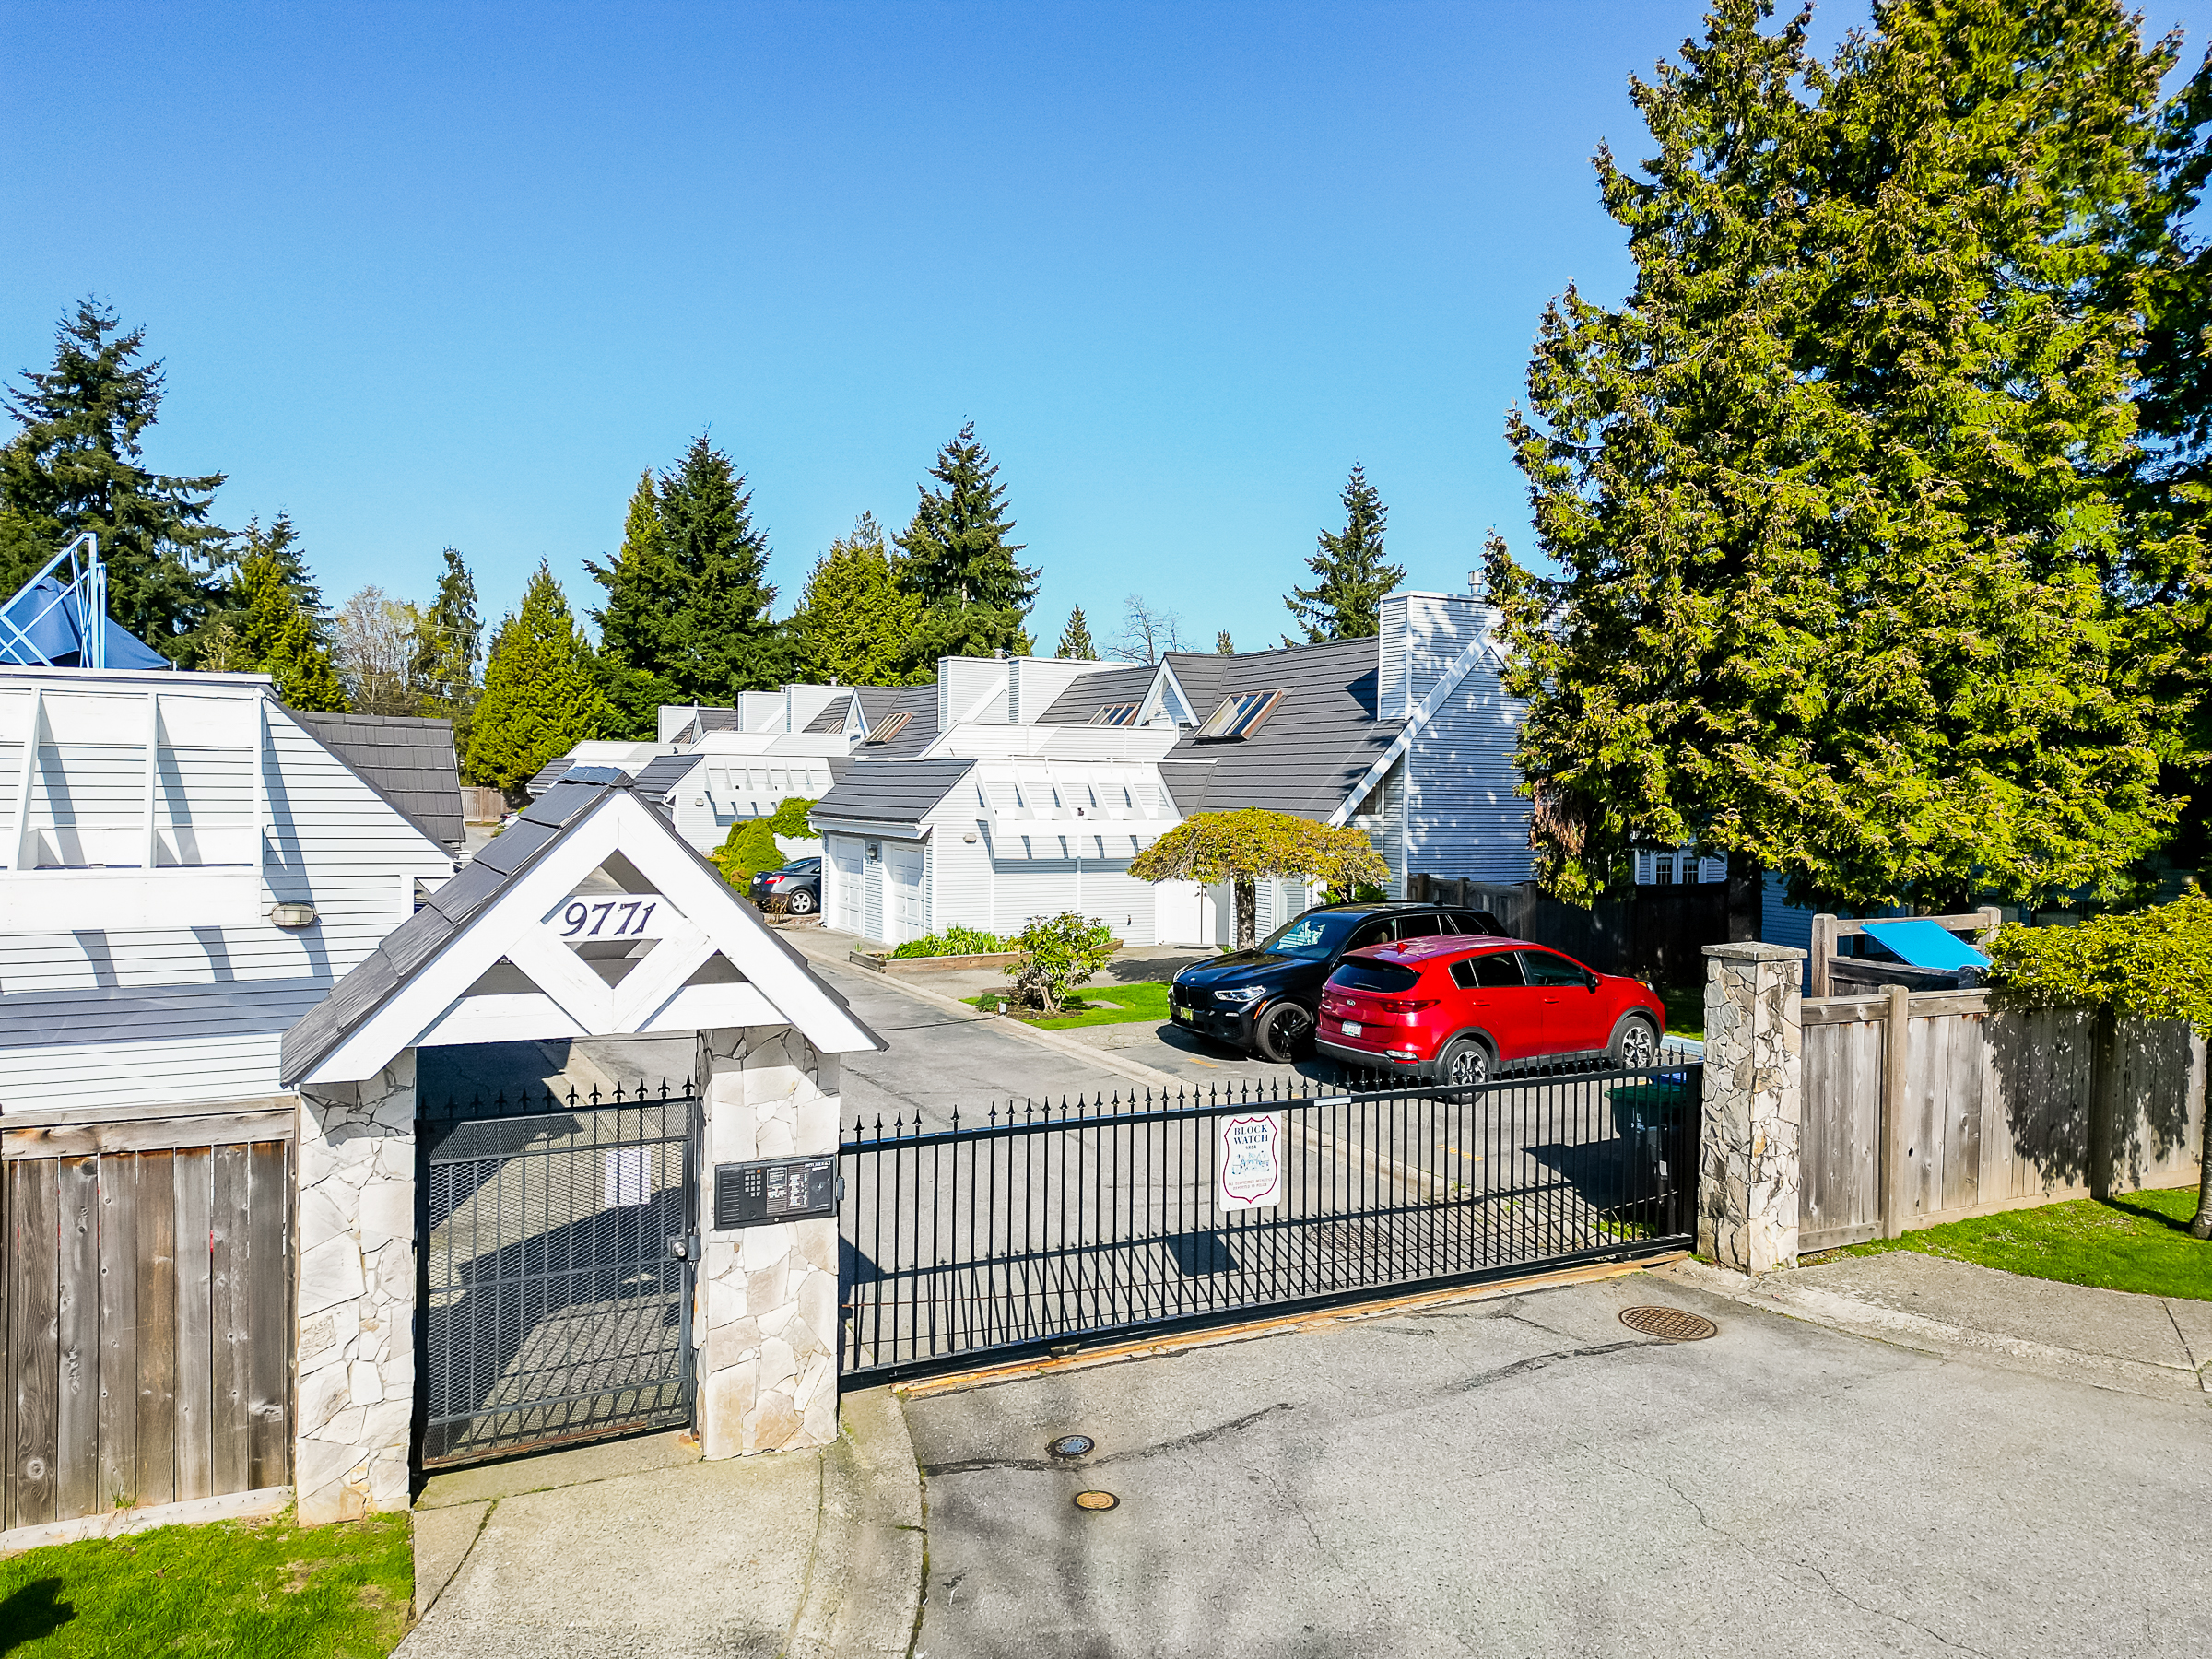 Guilford Real Estate Townhome Krista Lapp Unit 14 9771 152B Street Surrey Listings